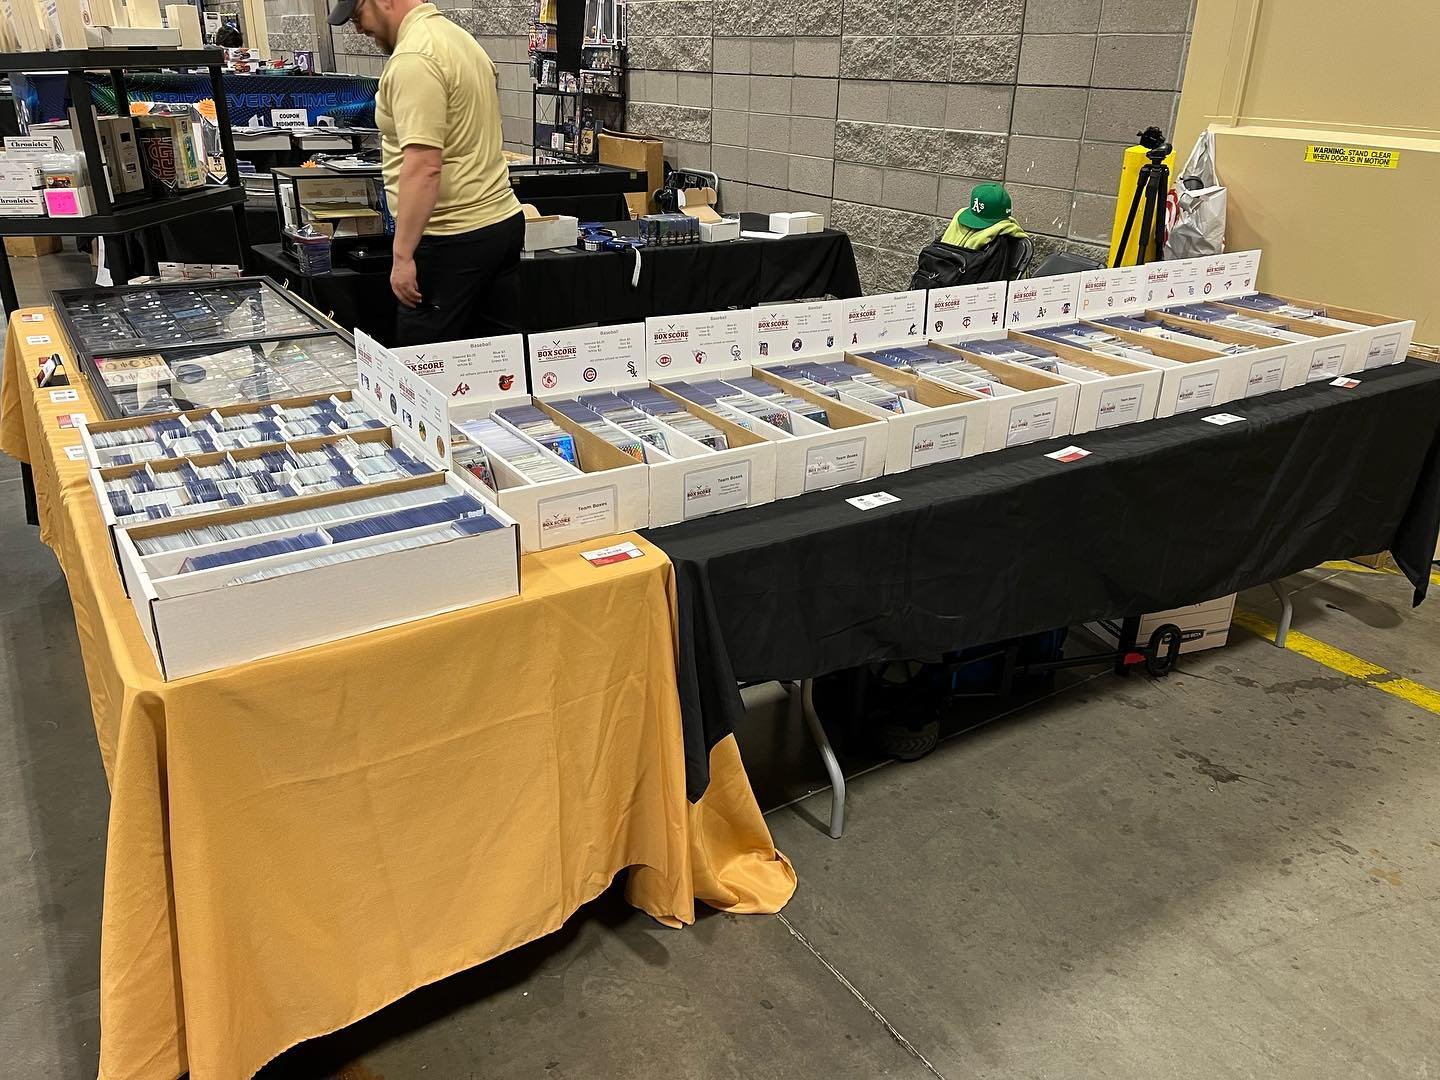 Day 3 of the @arizonastatecardshow! Let&rsquo;s do this! It&rsquo;s going to be fun and we&rsquo;re looking forward to meeting a lot of great collectors. @bossmansportscards @biceballcards